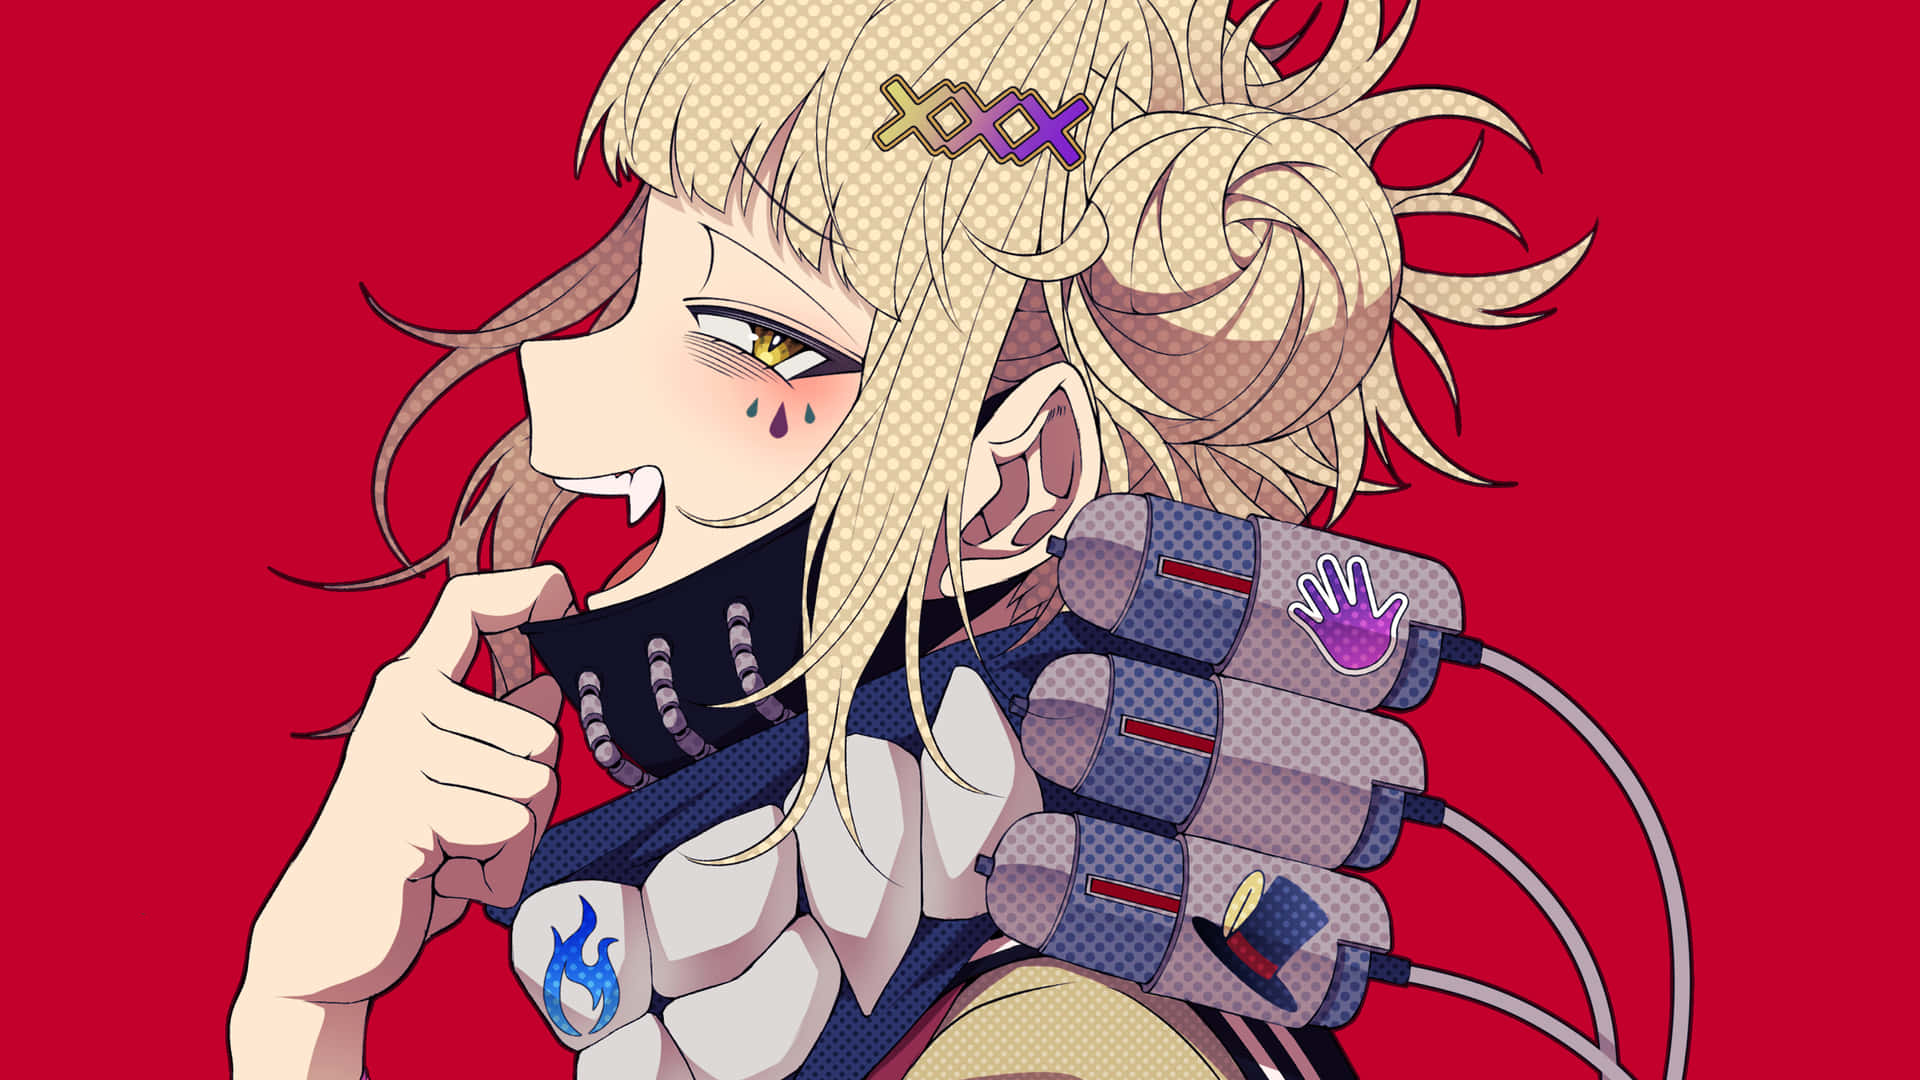 Complete the mission like Toga from My Hero Academia! Wallpaper